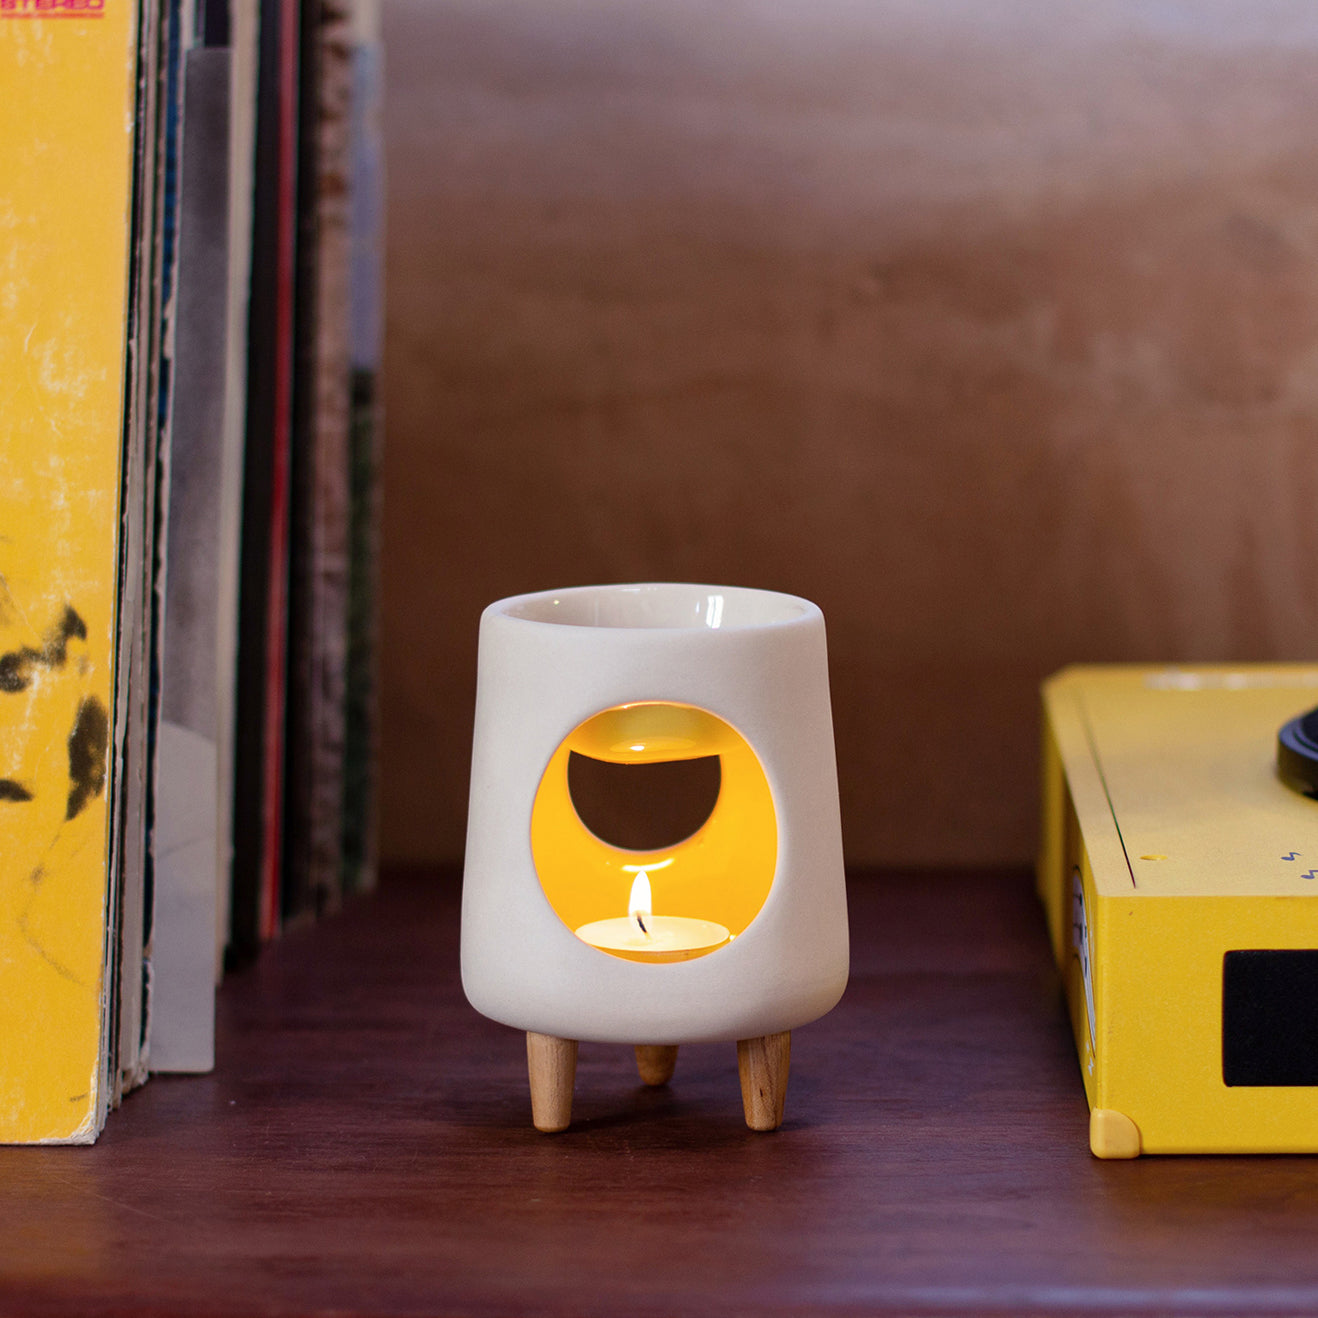 Ceramic wax warmer essential oil warmer by Arya Tara Candles. White outside yellow inside colored. Ceramic handmade tealight wax warmer with wooden legs.